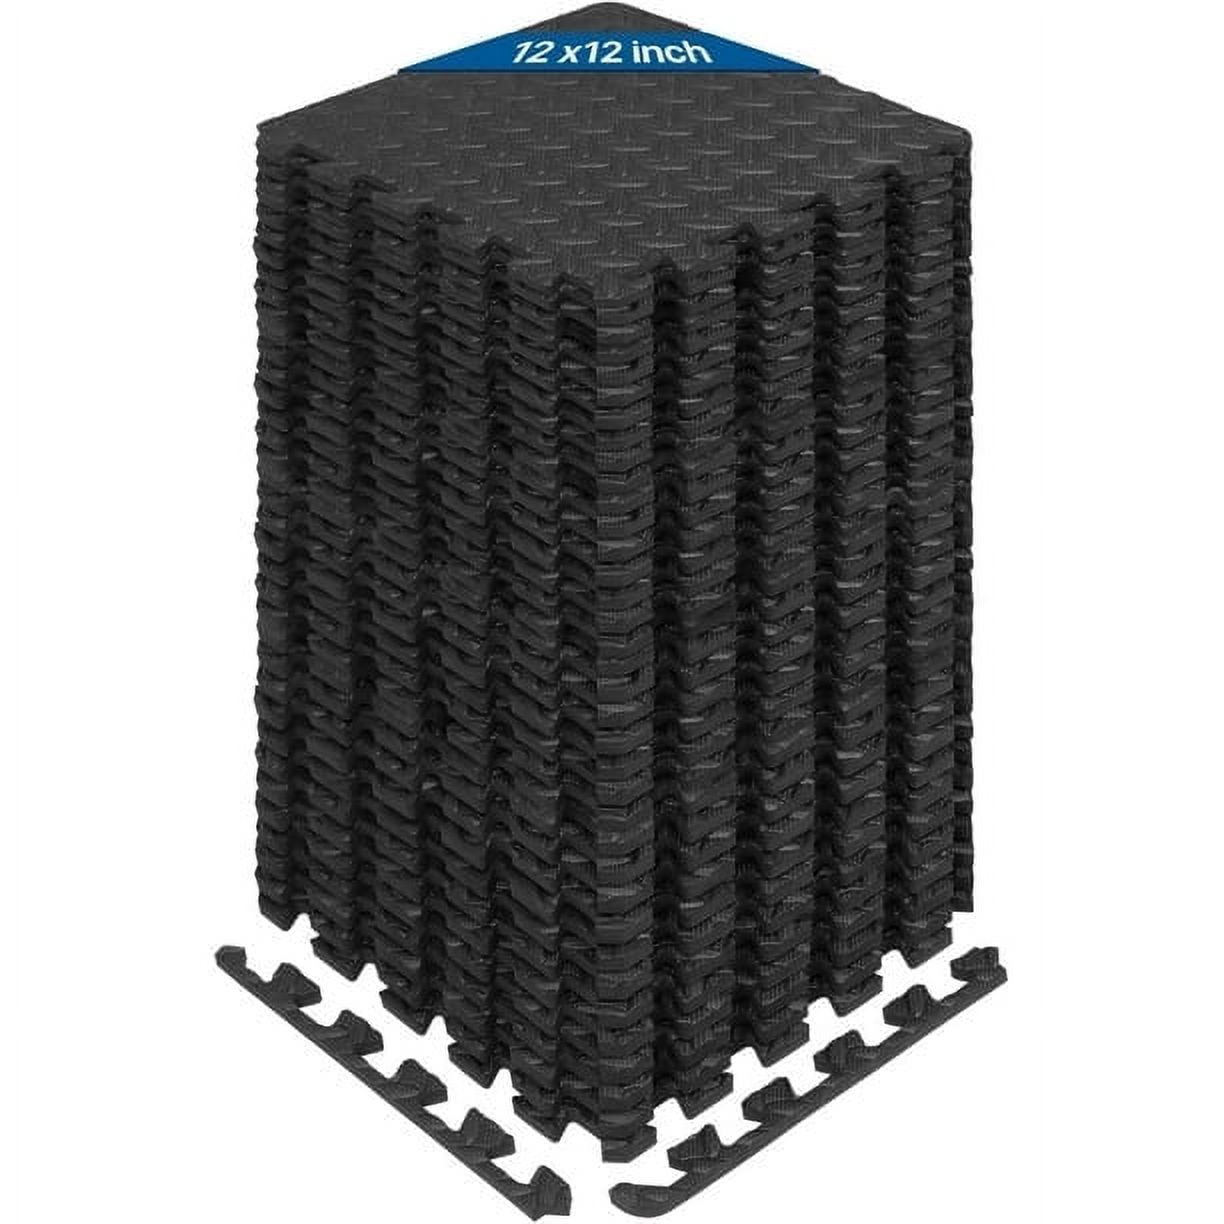 Yes4All 36 pcs Interlocking Exercise Foam Mats, Cover 36 sqft, 3/8 inch  Thick, Black Color